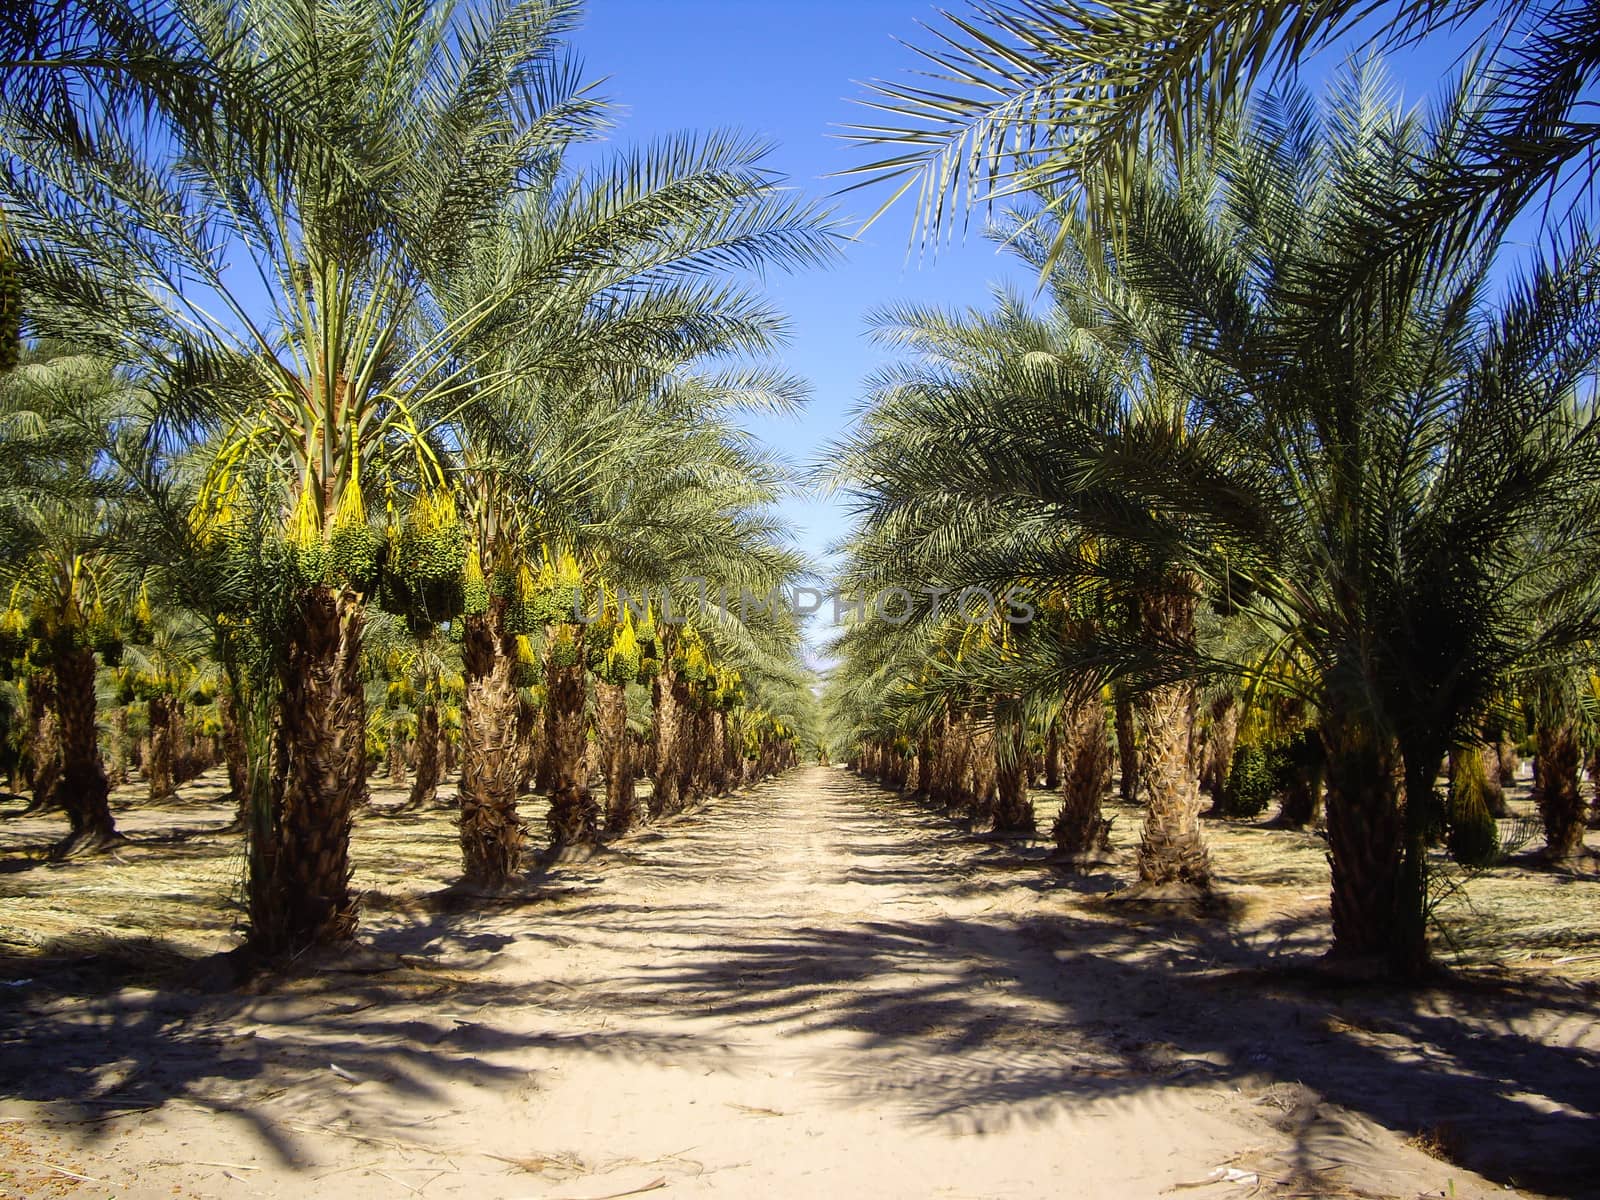 Date Palm Trees by emattil